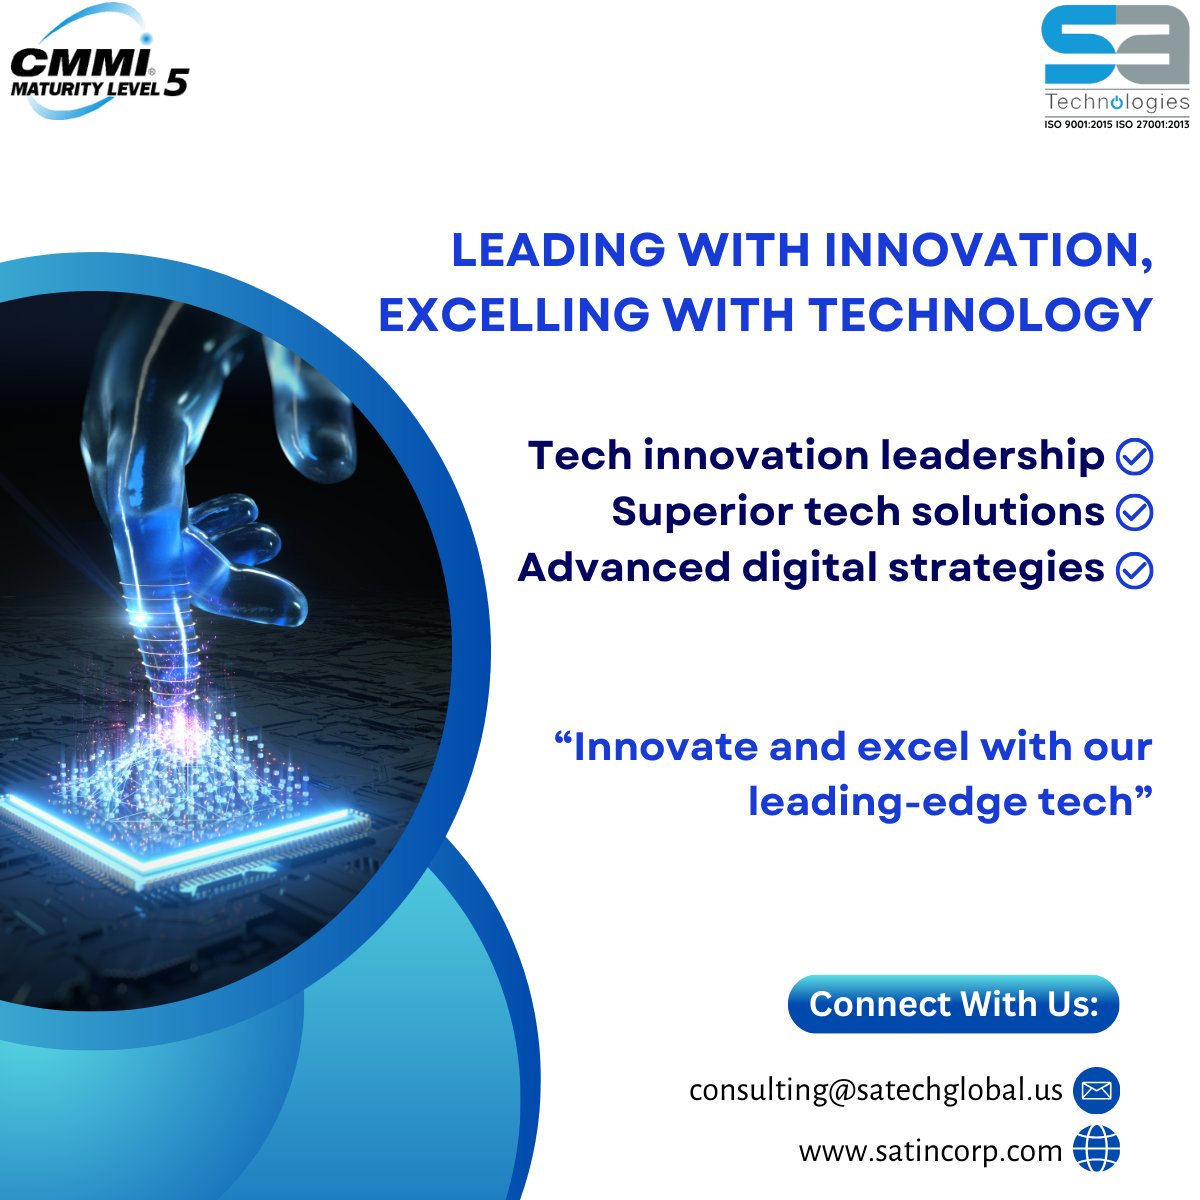 Lead the way in your industry with our innovative and technologically advanced solutions.

Visit: satincorp.com 

#leadinginnovation #techexcellence #innovationleadership #technologicalsolutions #cuttingedgetech #SAtechnologies #lndustryleaders #techadvanced #SAT